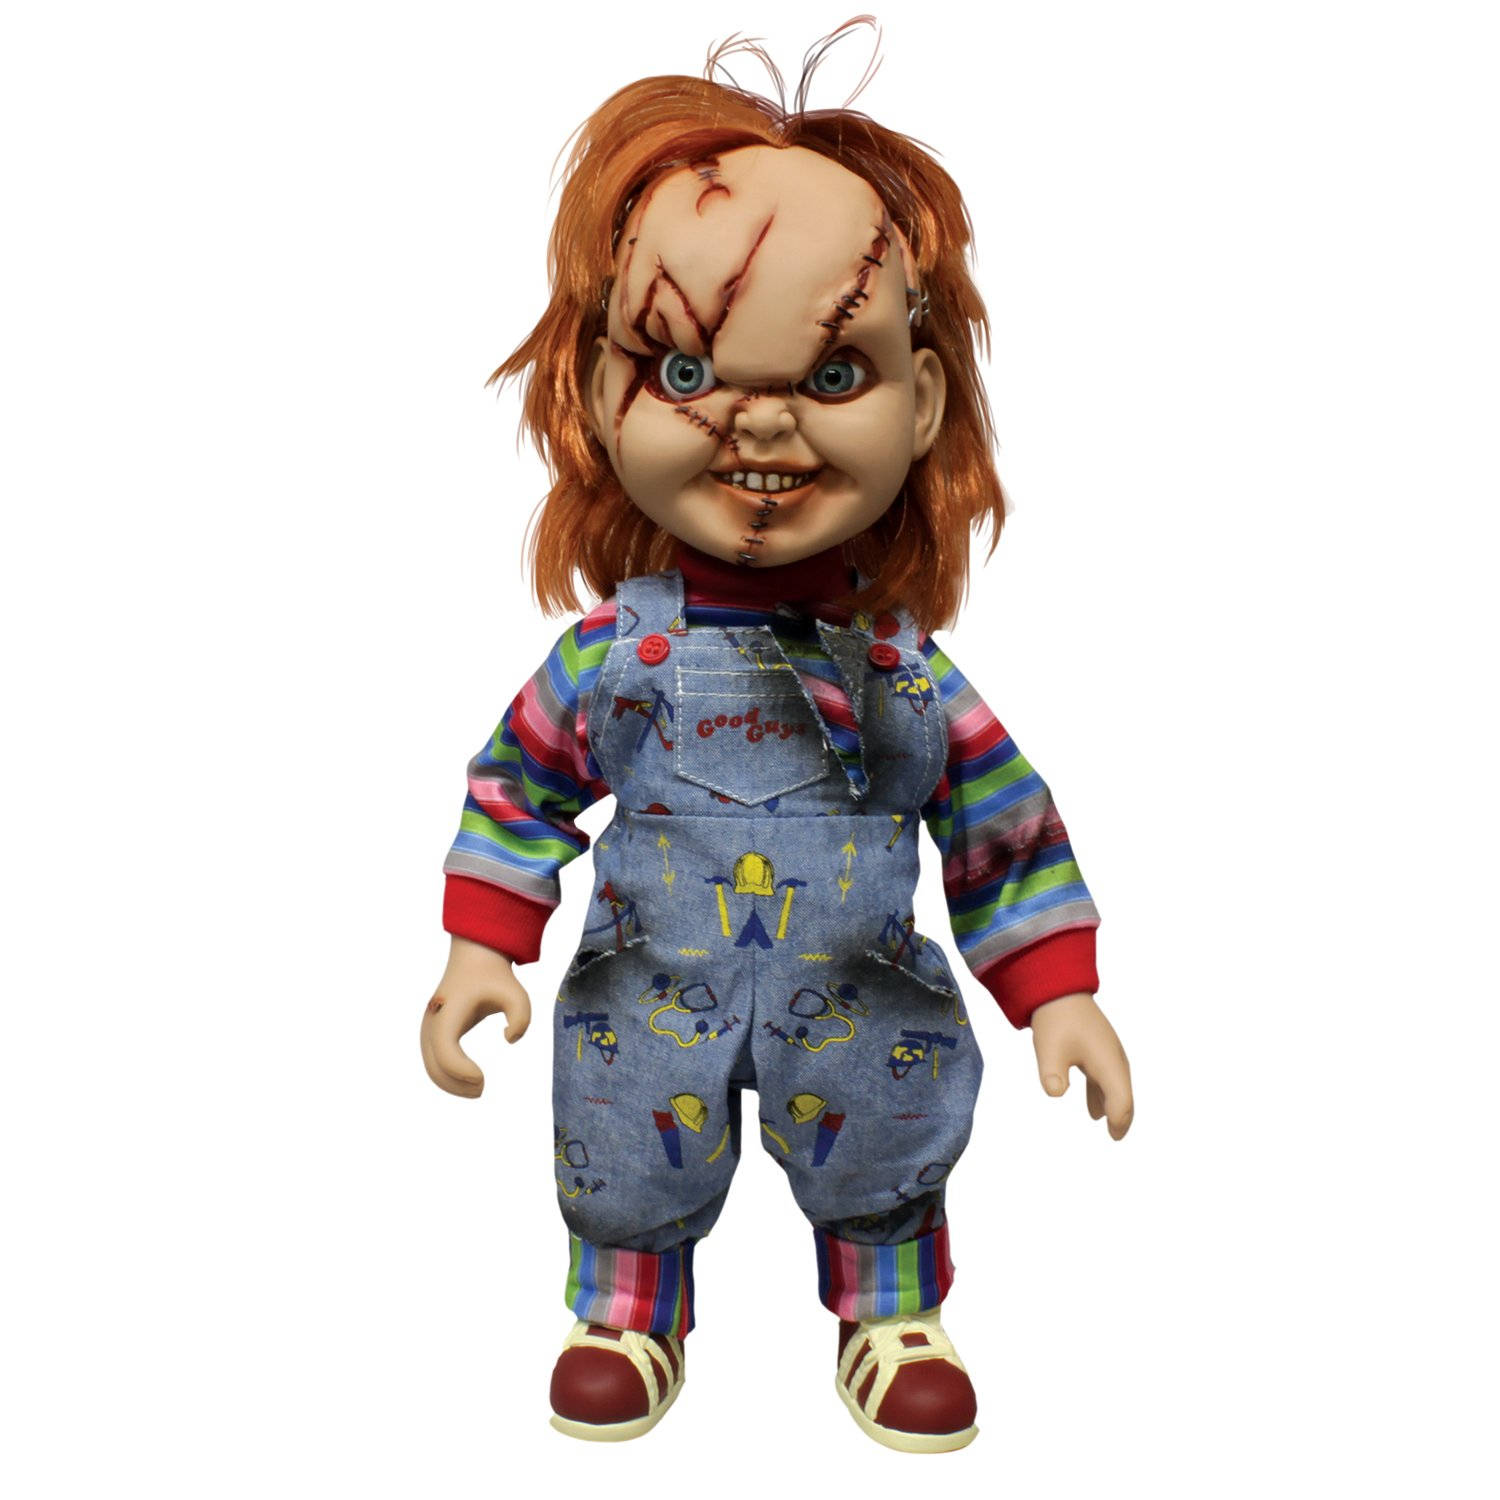 Chucky Doll Bad Guy With Scars Wallpaper